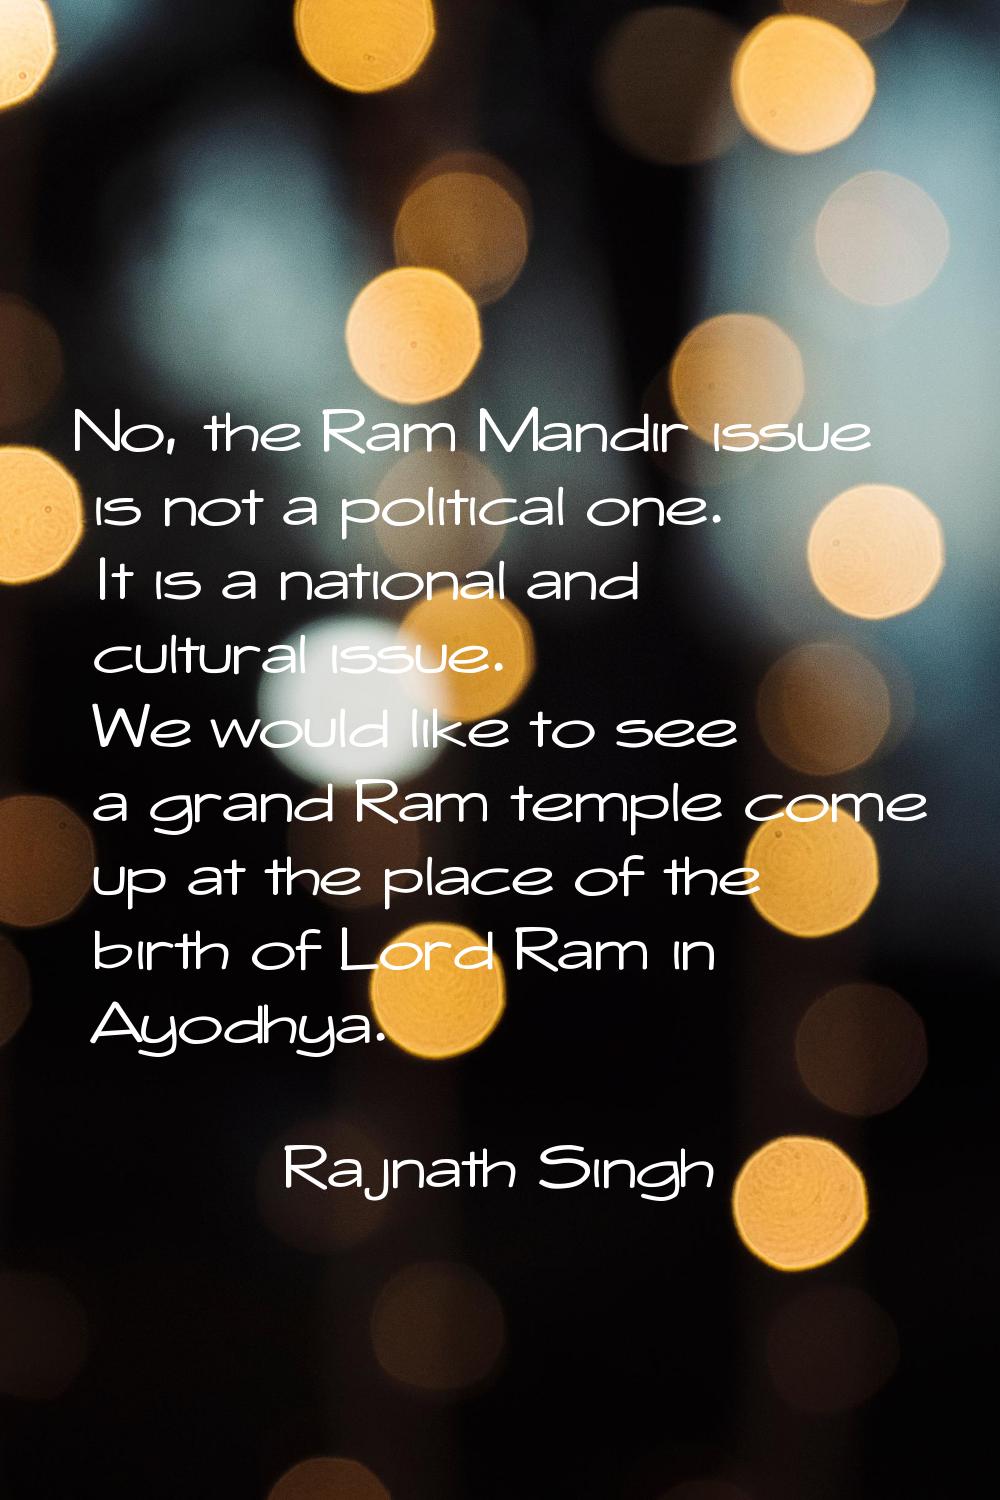 No, the Ram Mandir issue is not a political one. It is a national and cultural issue. We would like